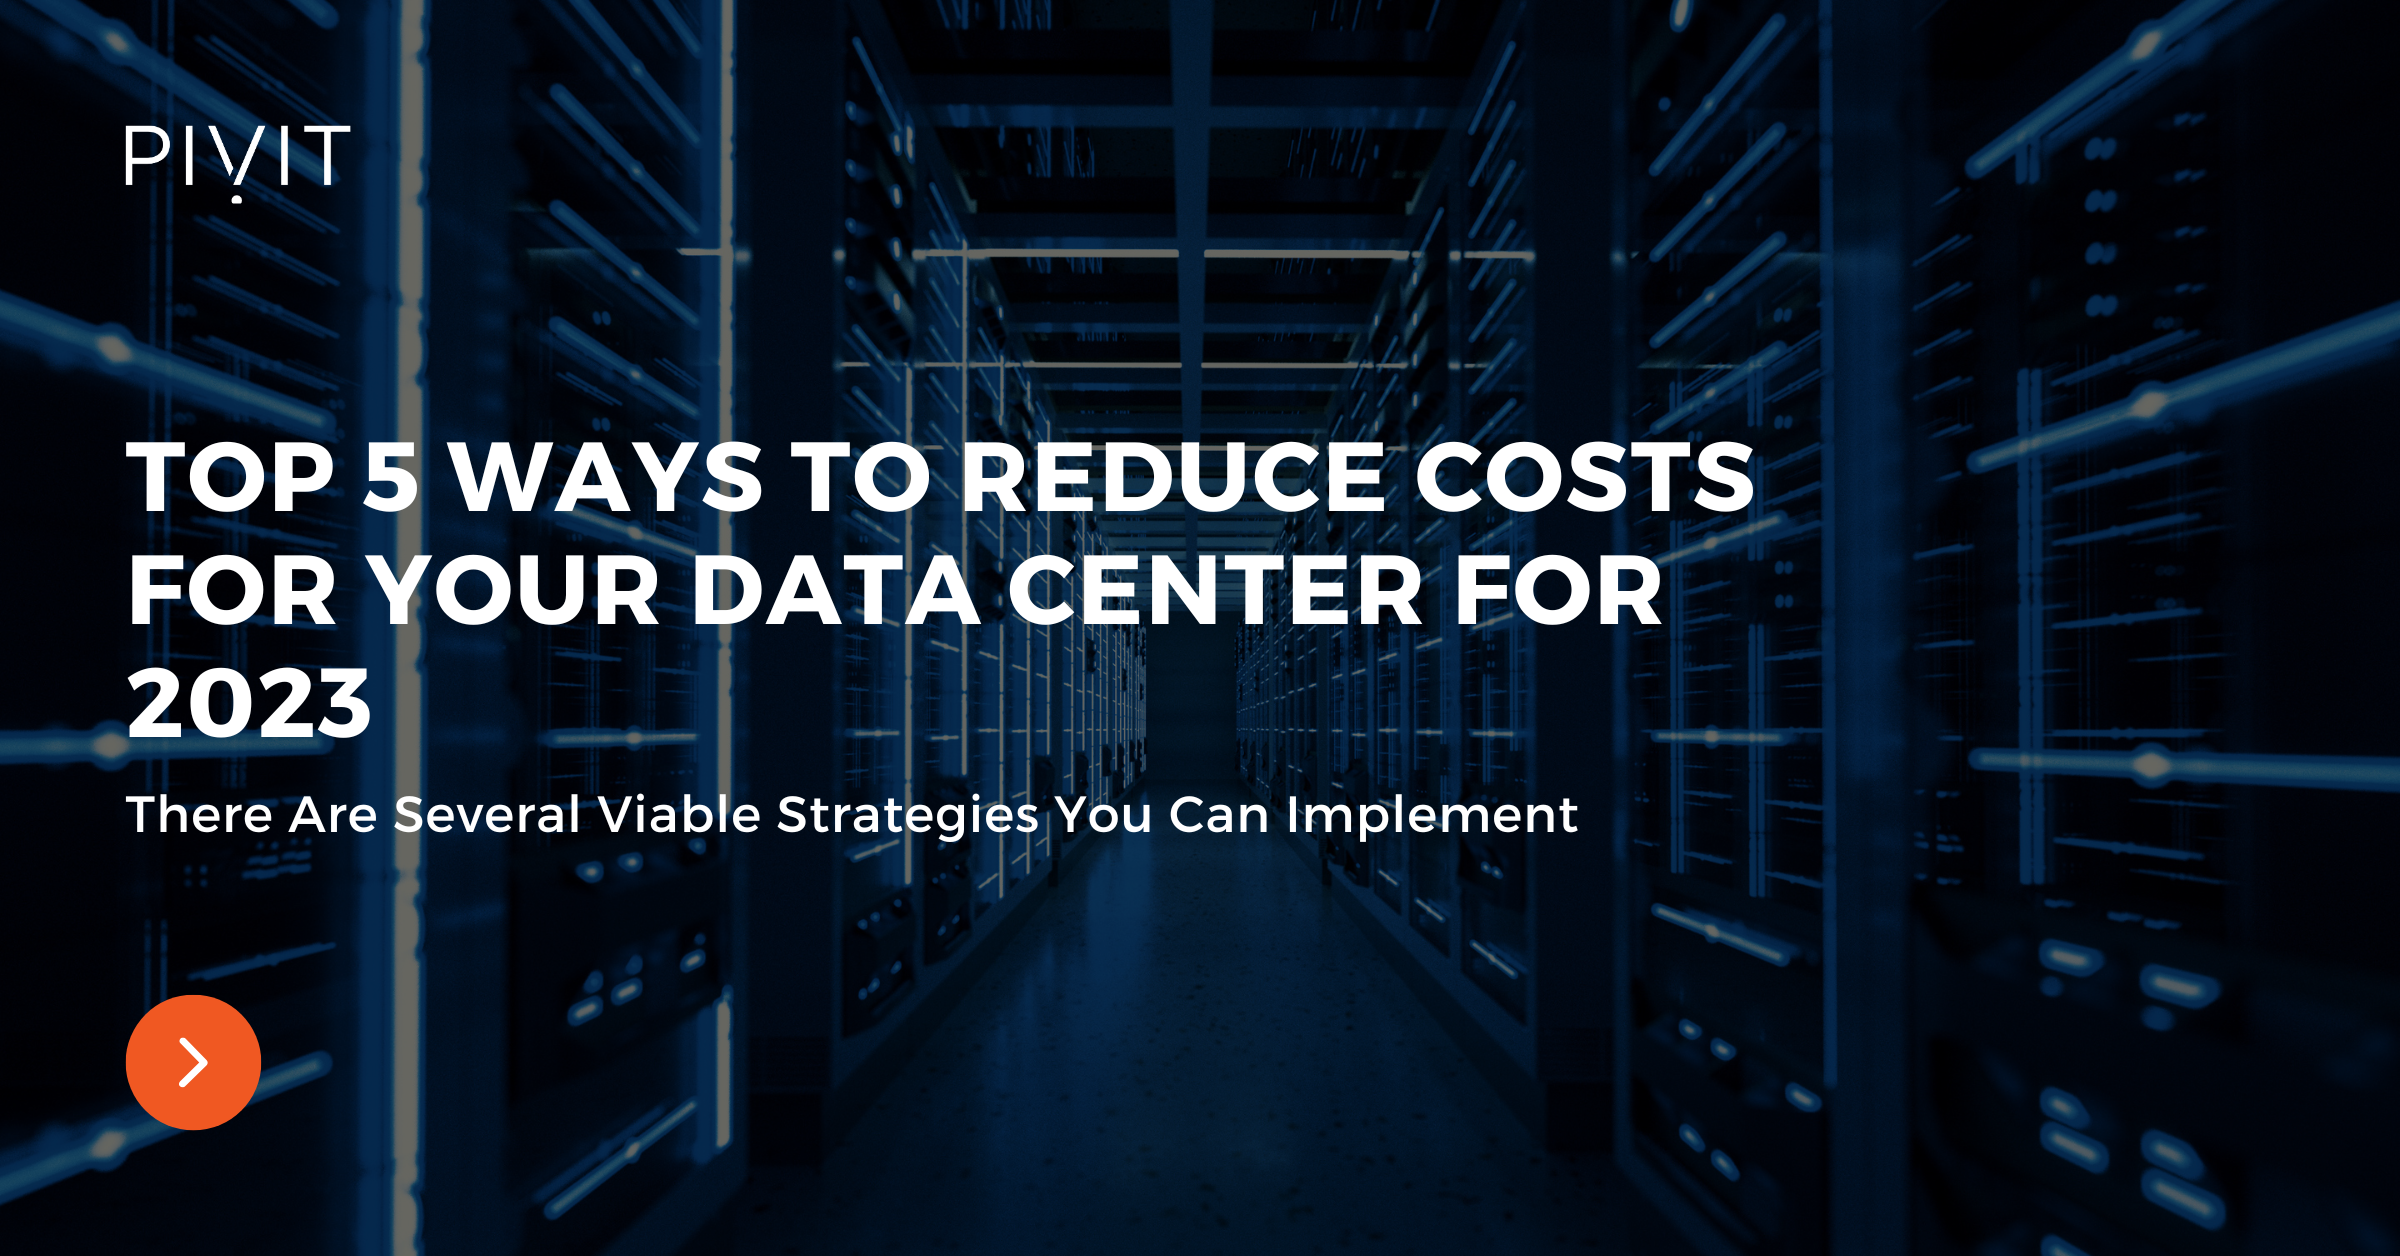 Top 5 Ways to Reduce Costs for Your Data Center for 2023